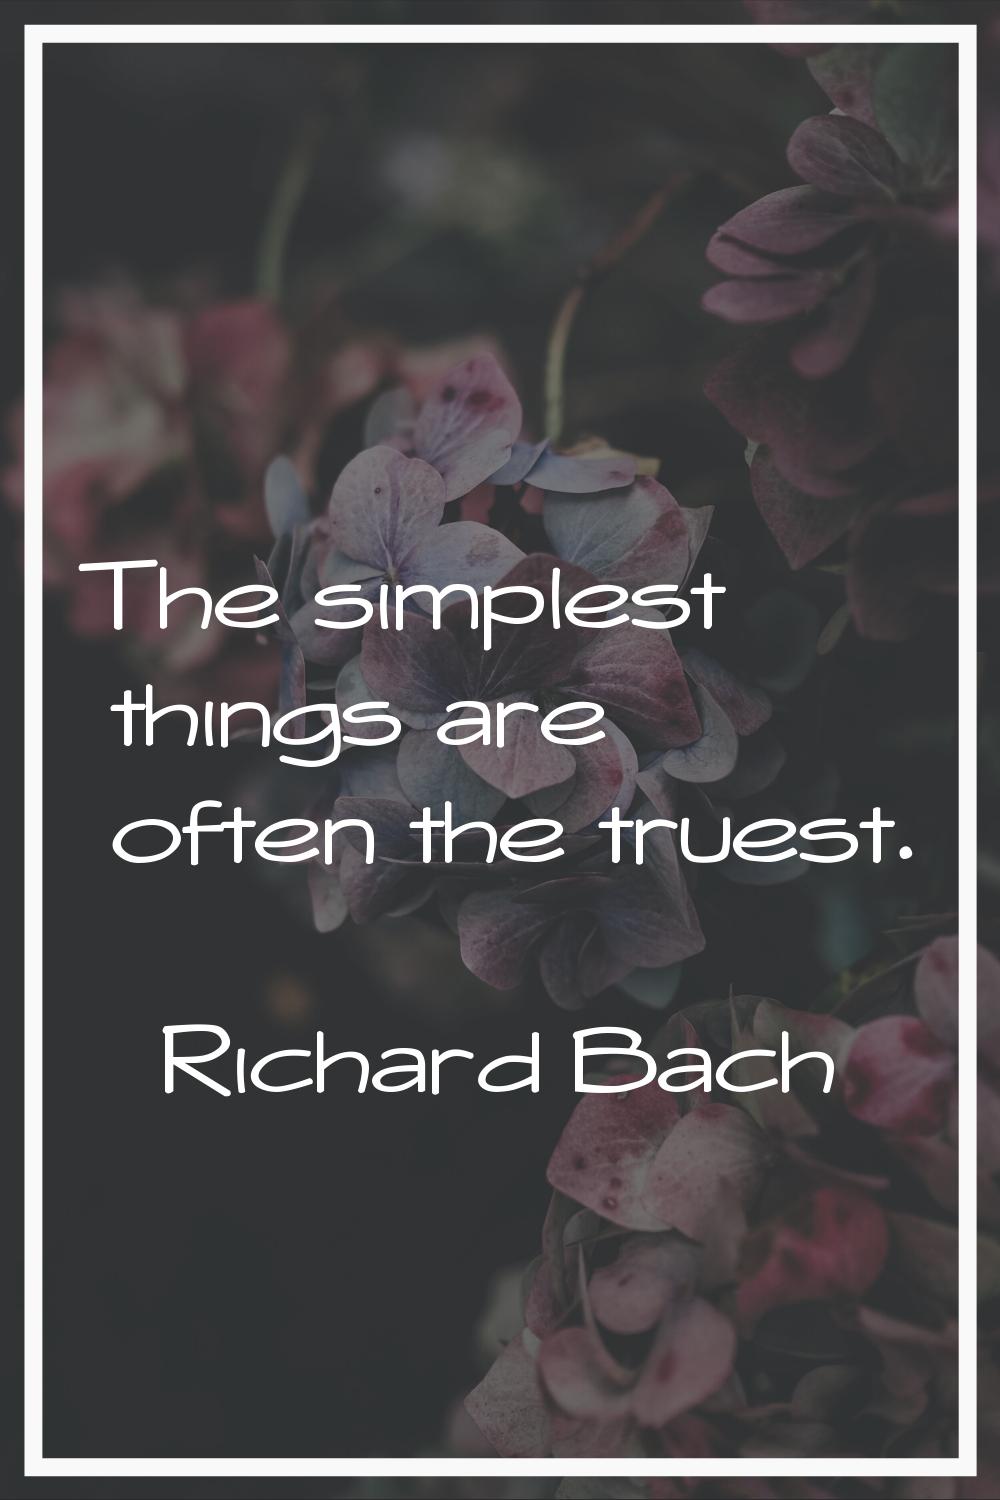 The simplest things are often the truest.